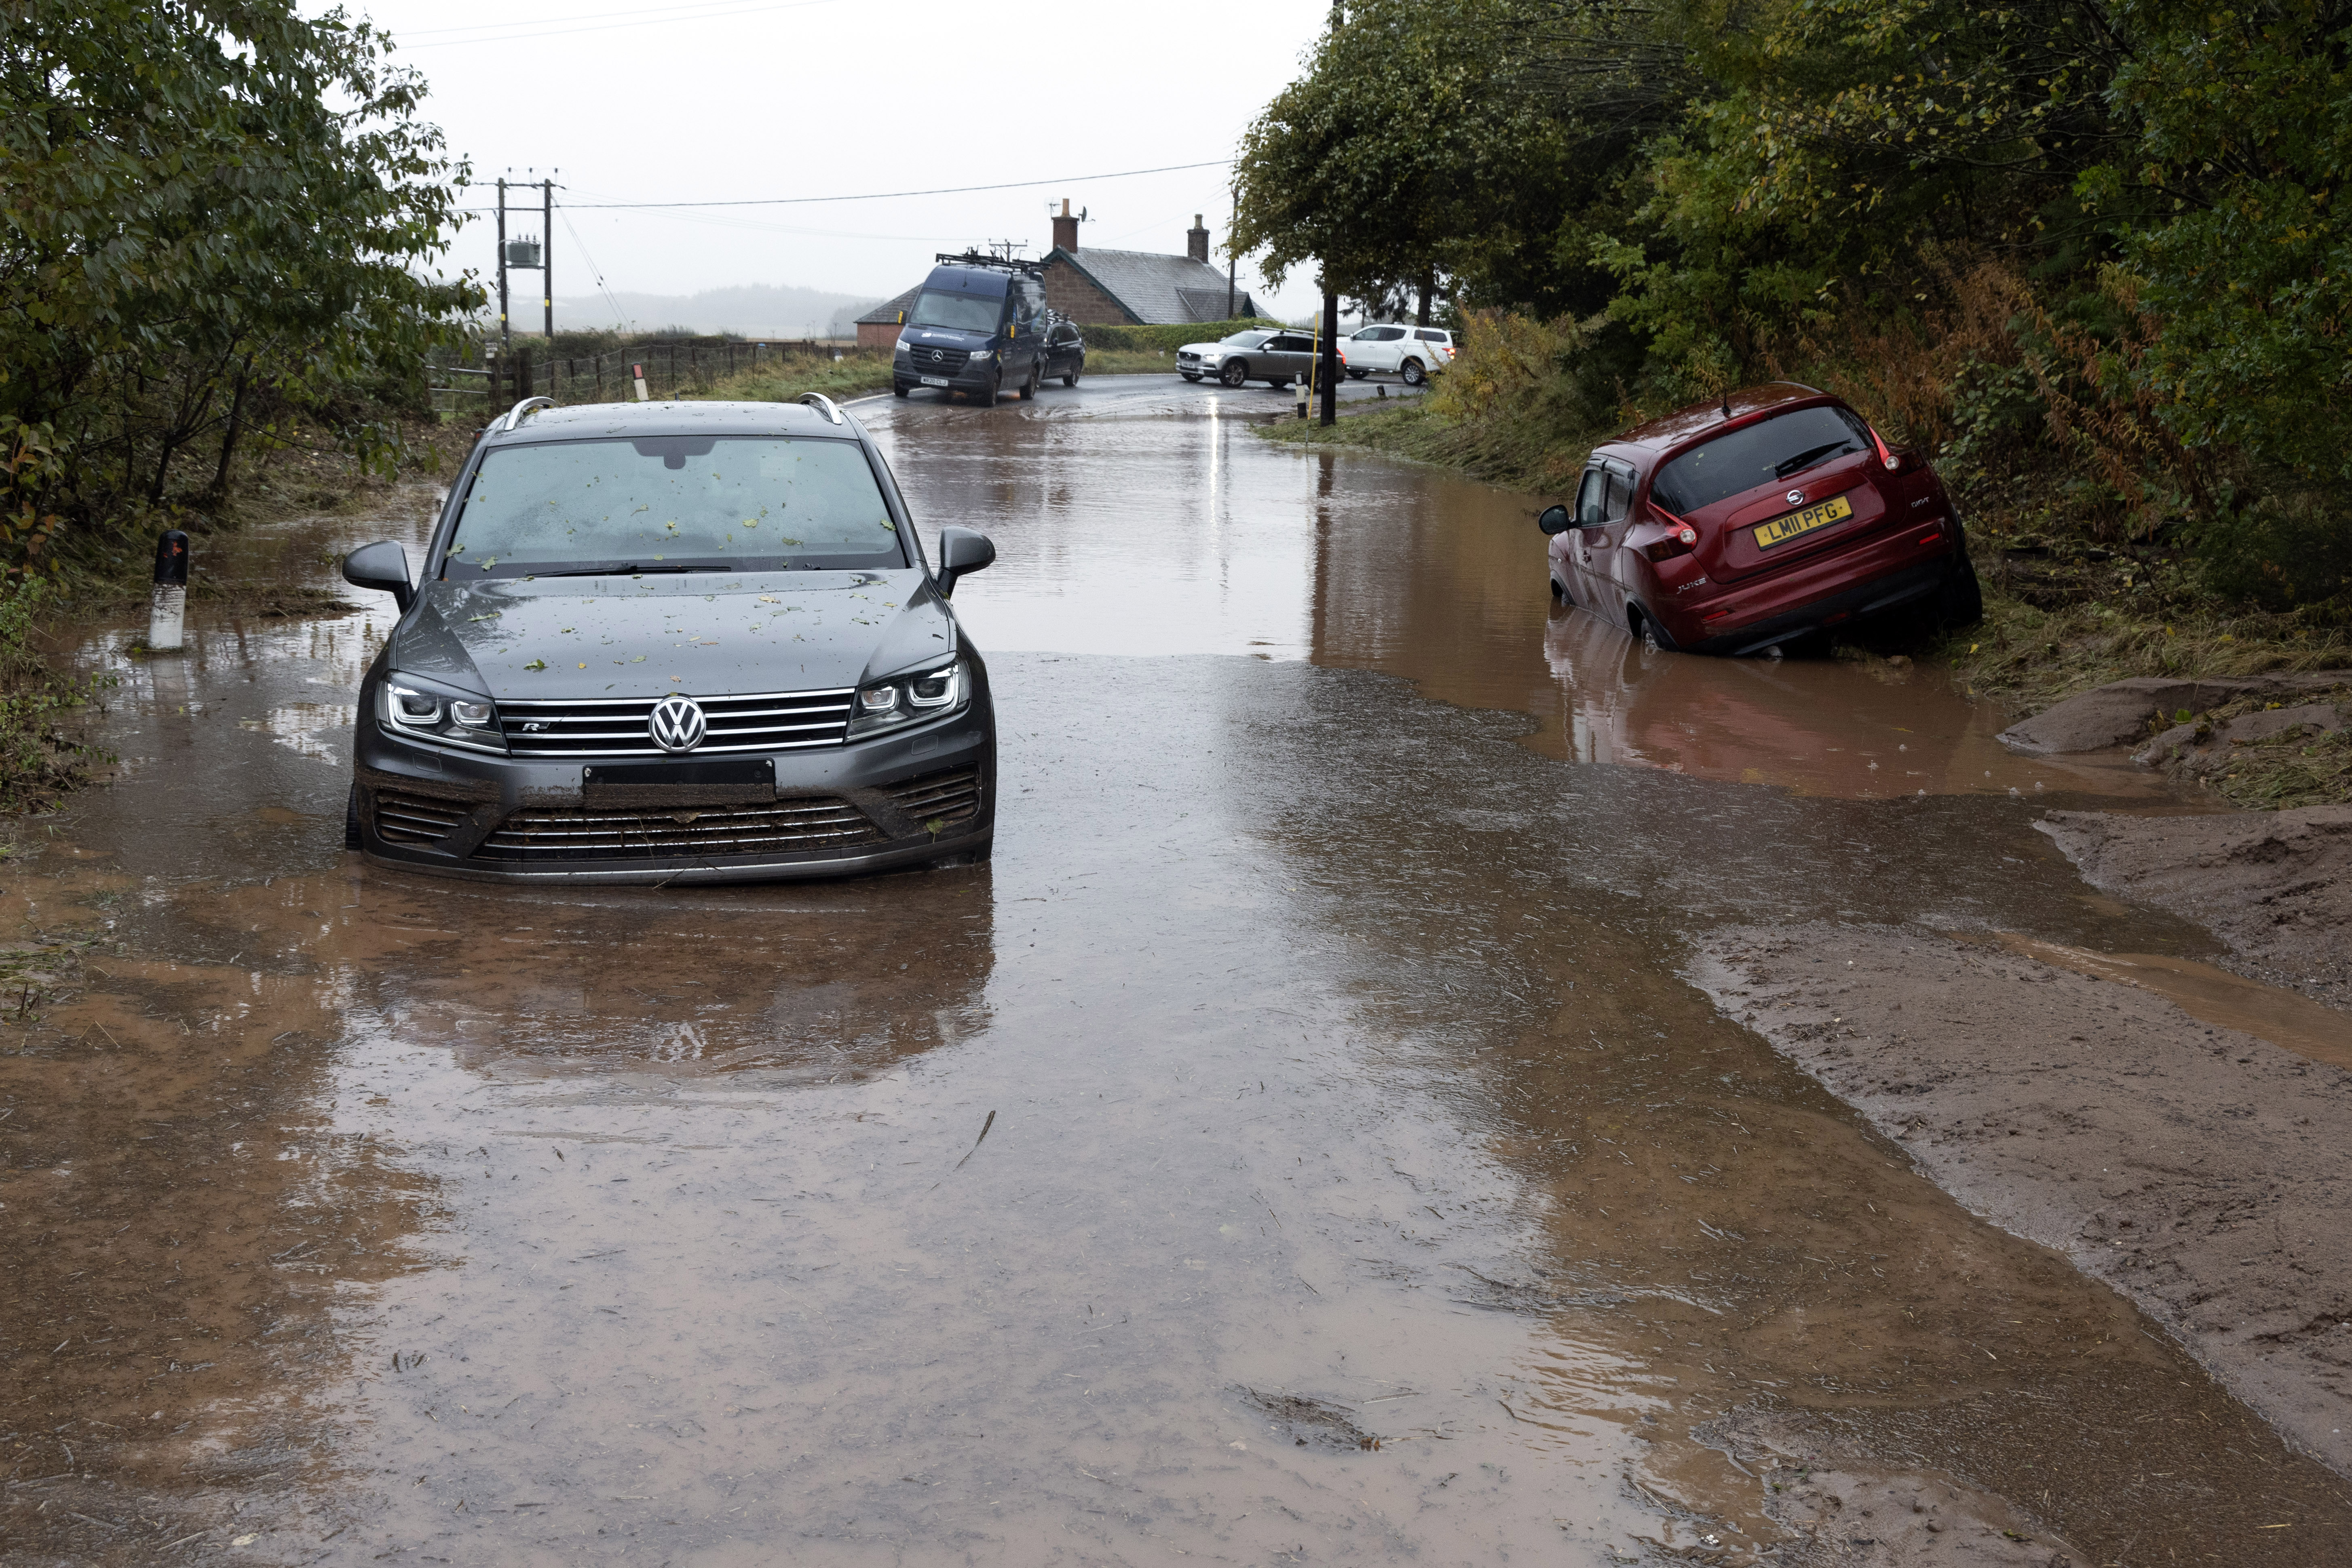 Vehicles stuck and abandoned in muddy floodwater in Perthshire, Scotland